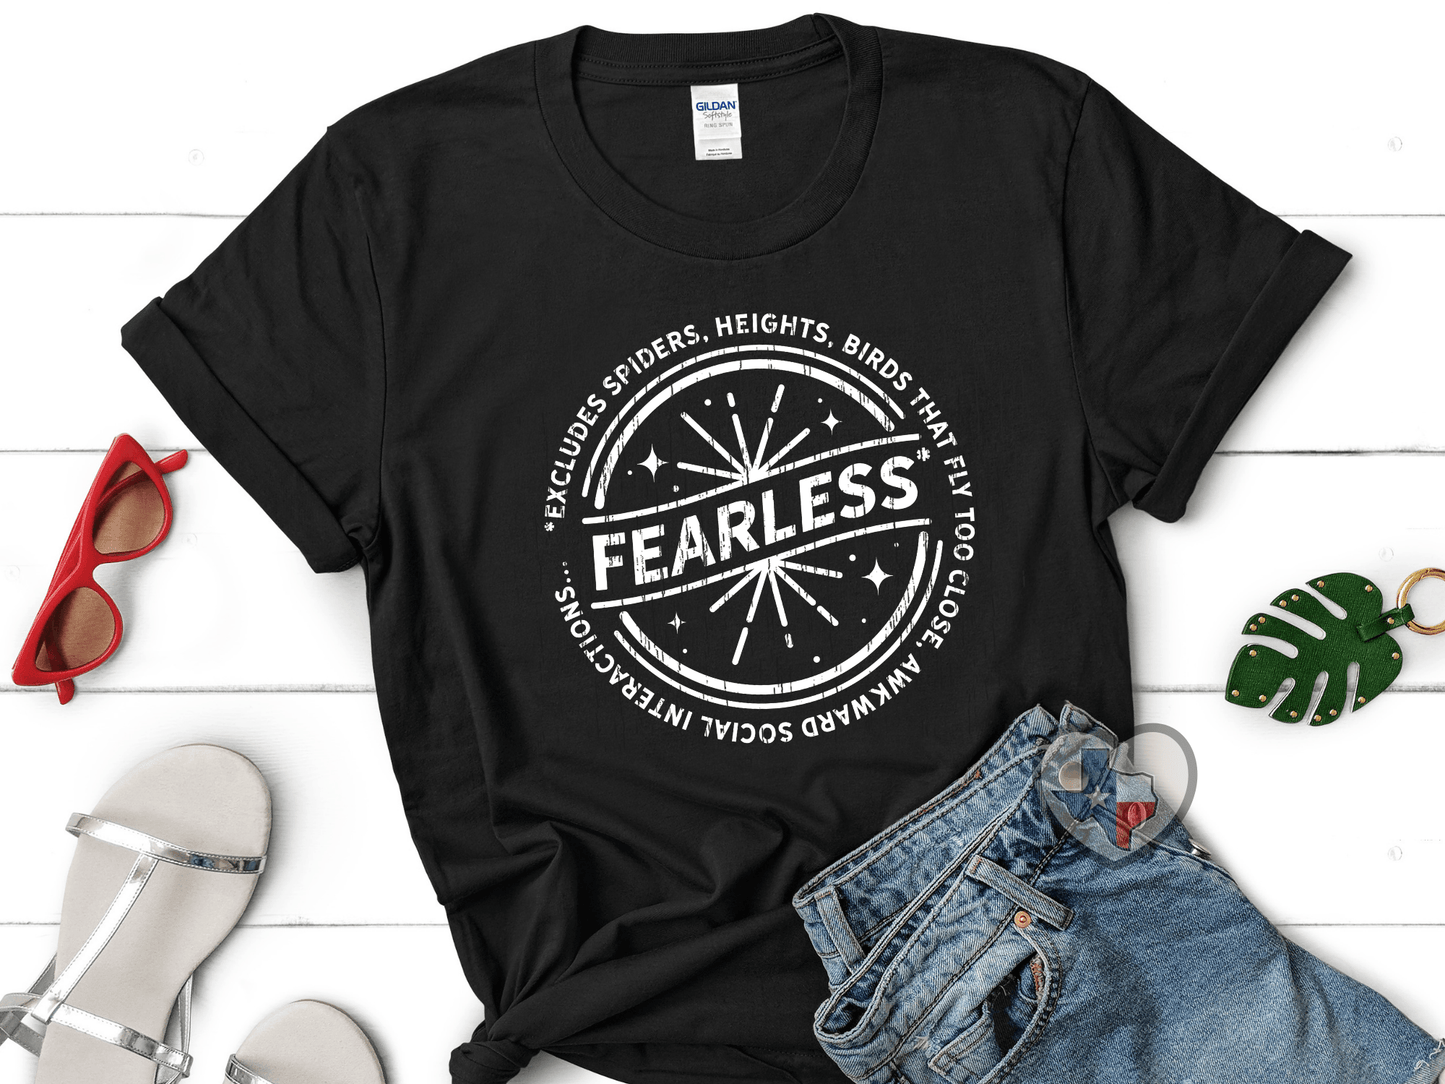 Fearless/Excludes - Texas Transfers and Designs